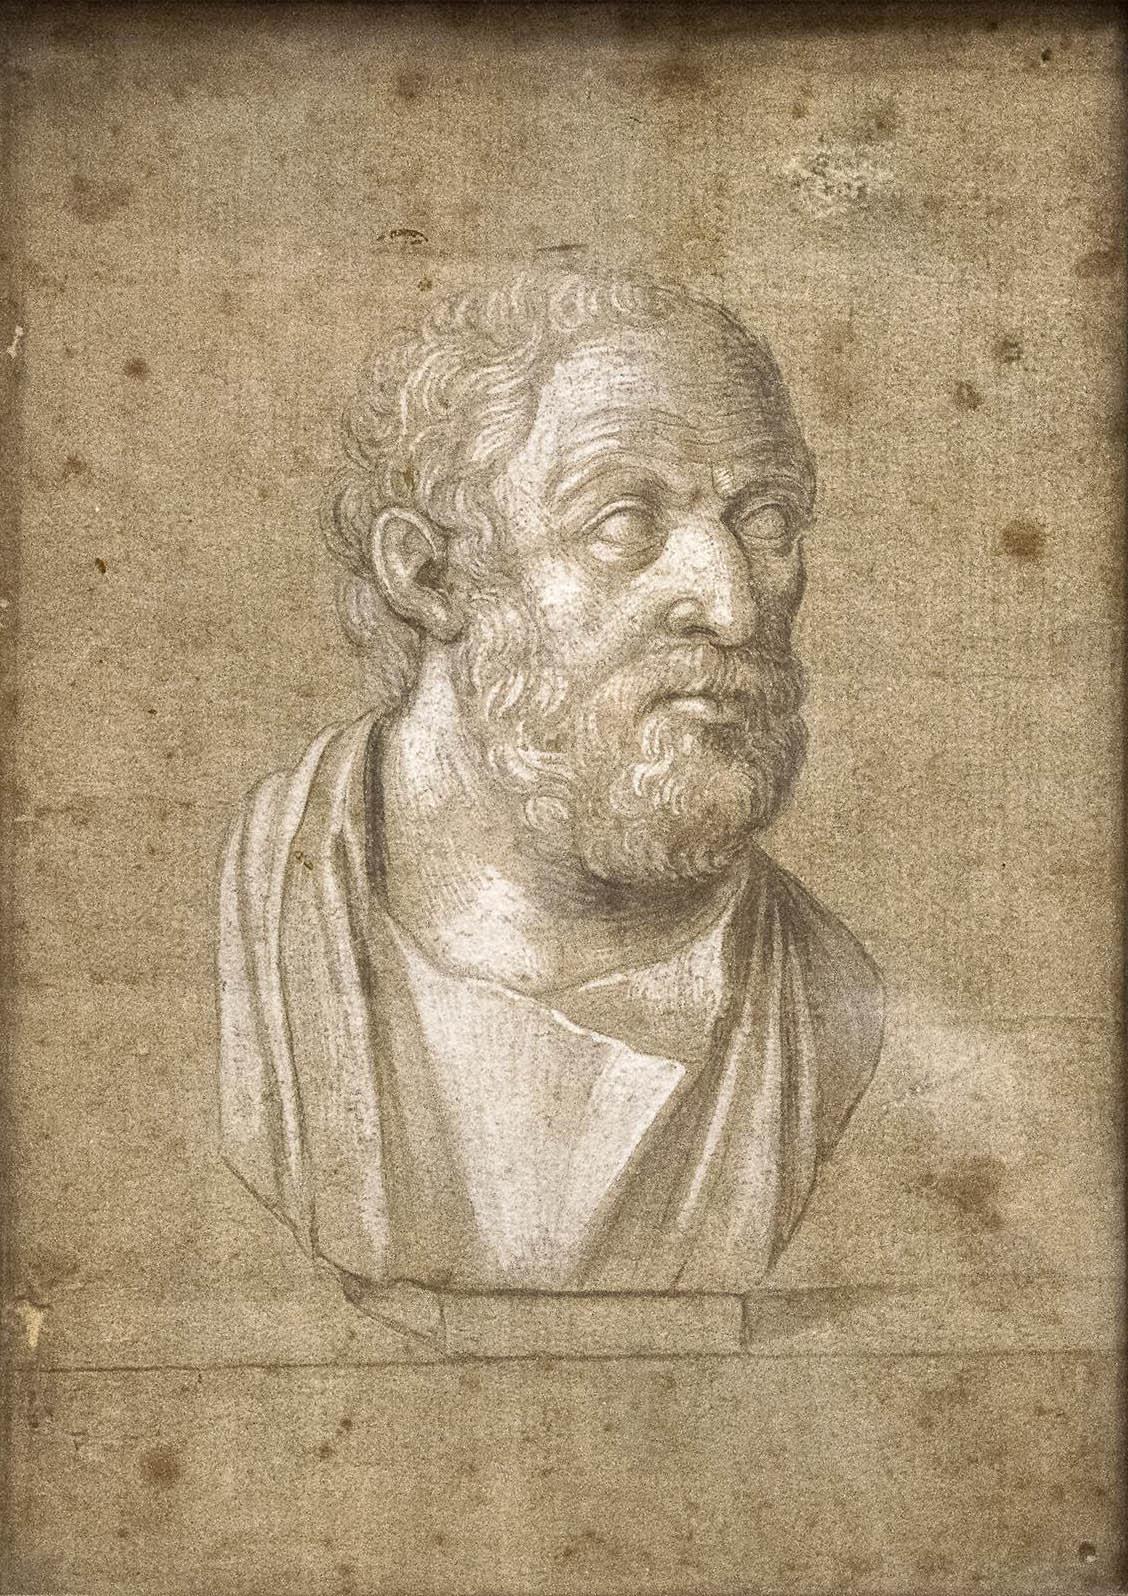 Antique framed Academic Chalk Drawing of a Greek Intellectual on Sepia toned and textured paper

Anonymous
Italy; 19th century
White and Dark Grey Chalk on Sepia Paper; narrow wooden frame

Approximate size: 8.25 (h) x 6 (w) in.

The present sketch,